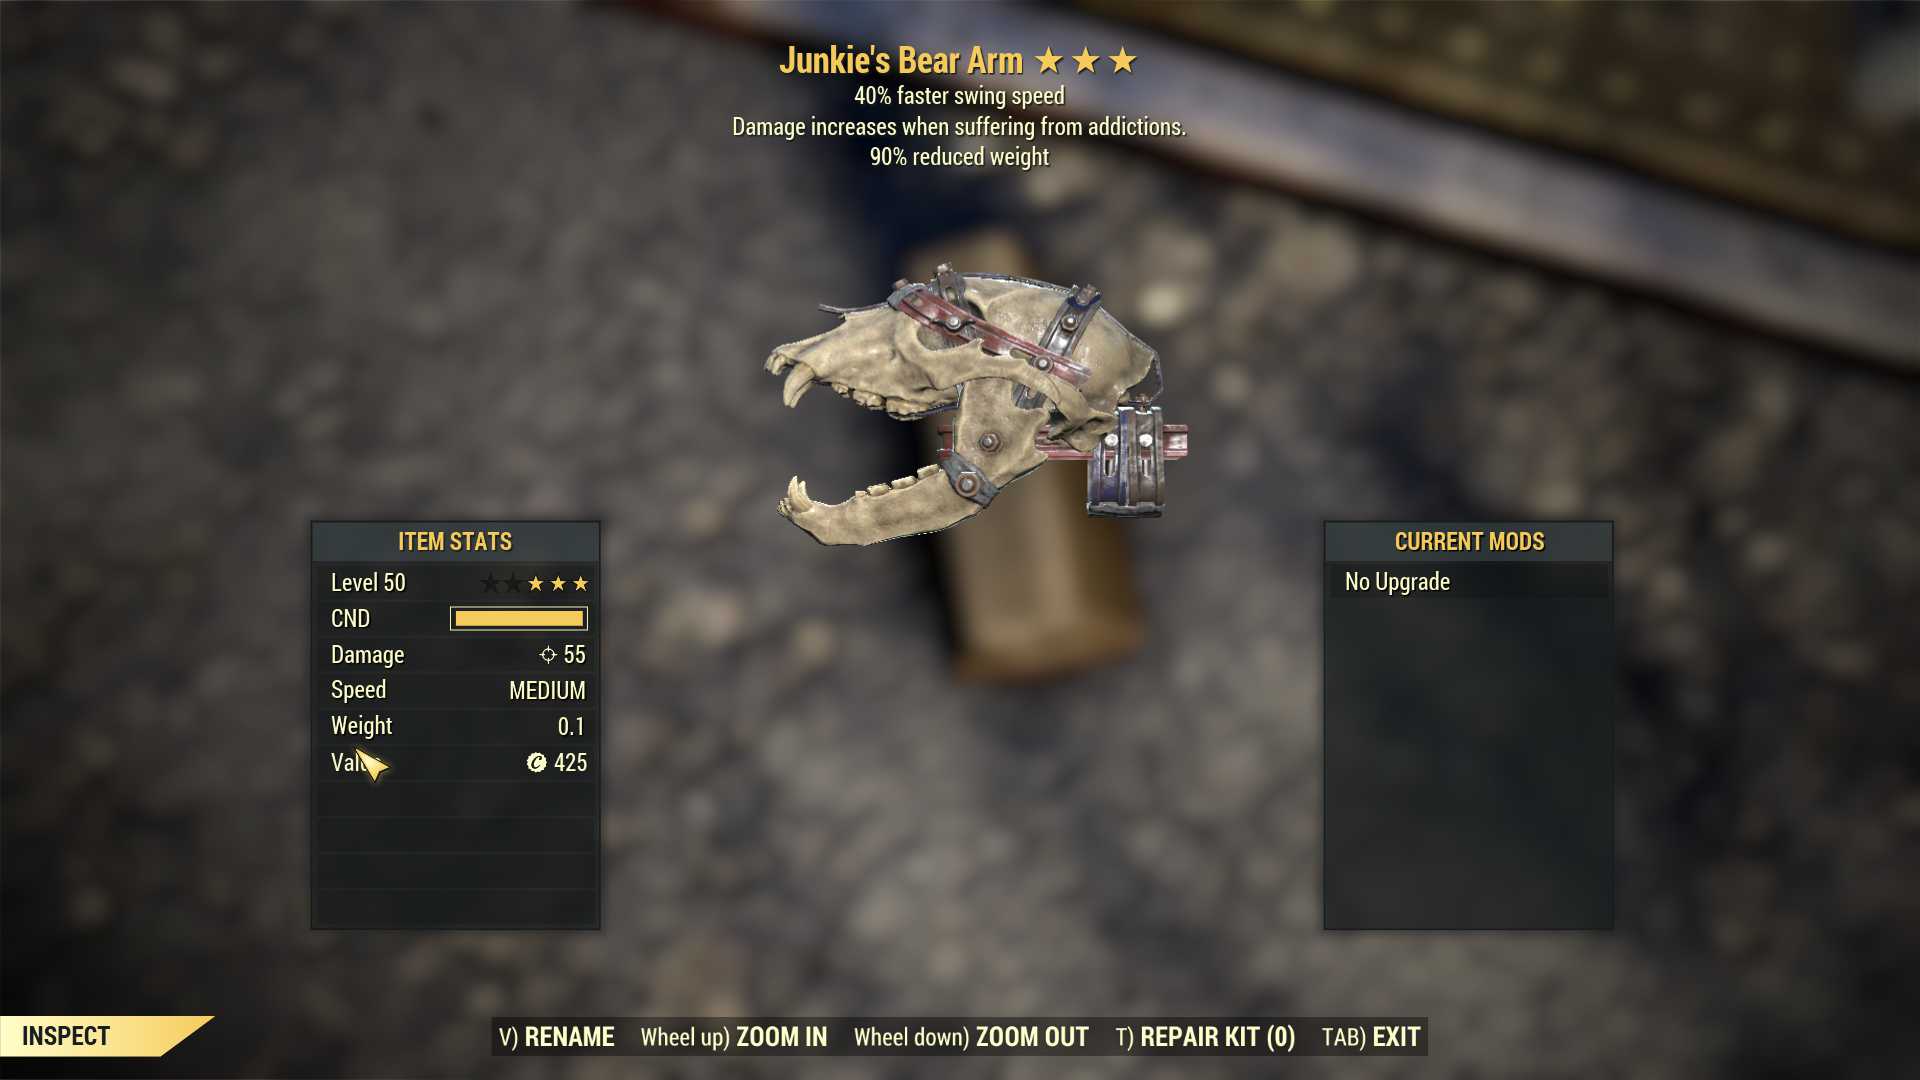 Junkie's Bear Arm (40% Faster Swing Speed, 90% reduced weight)